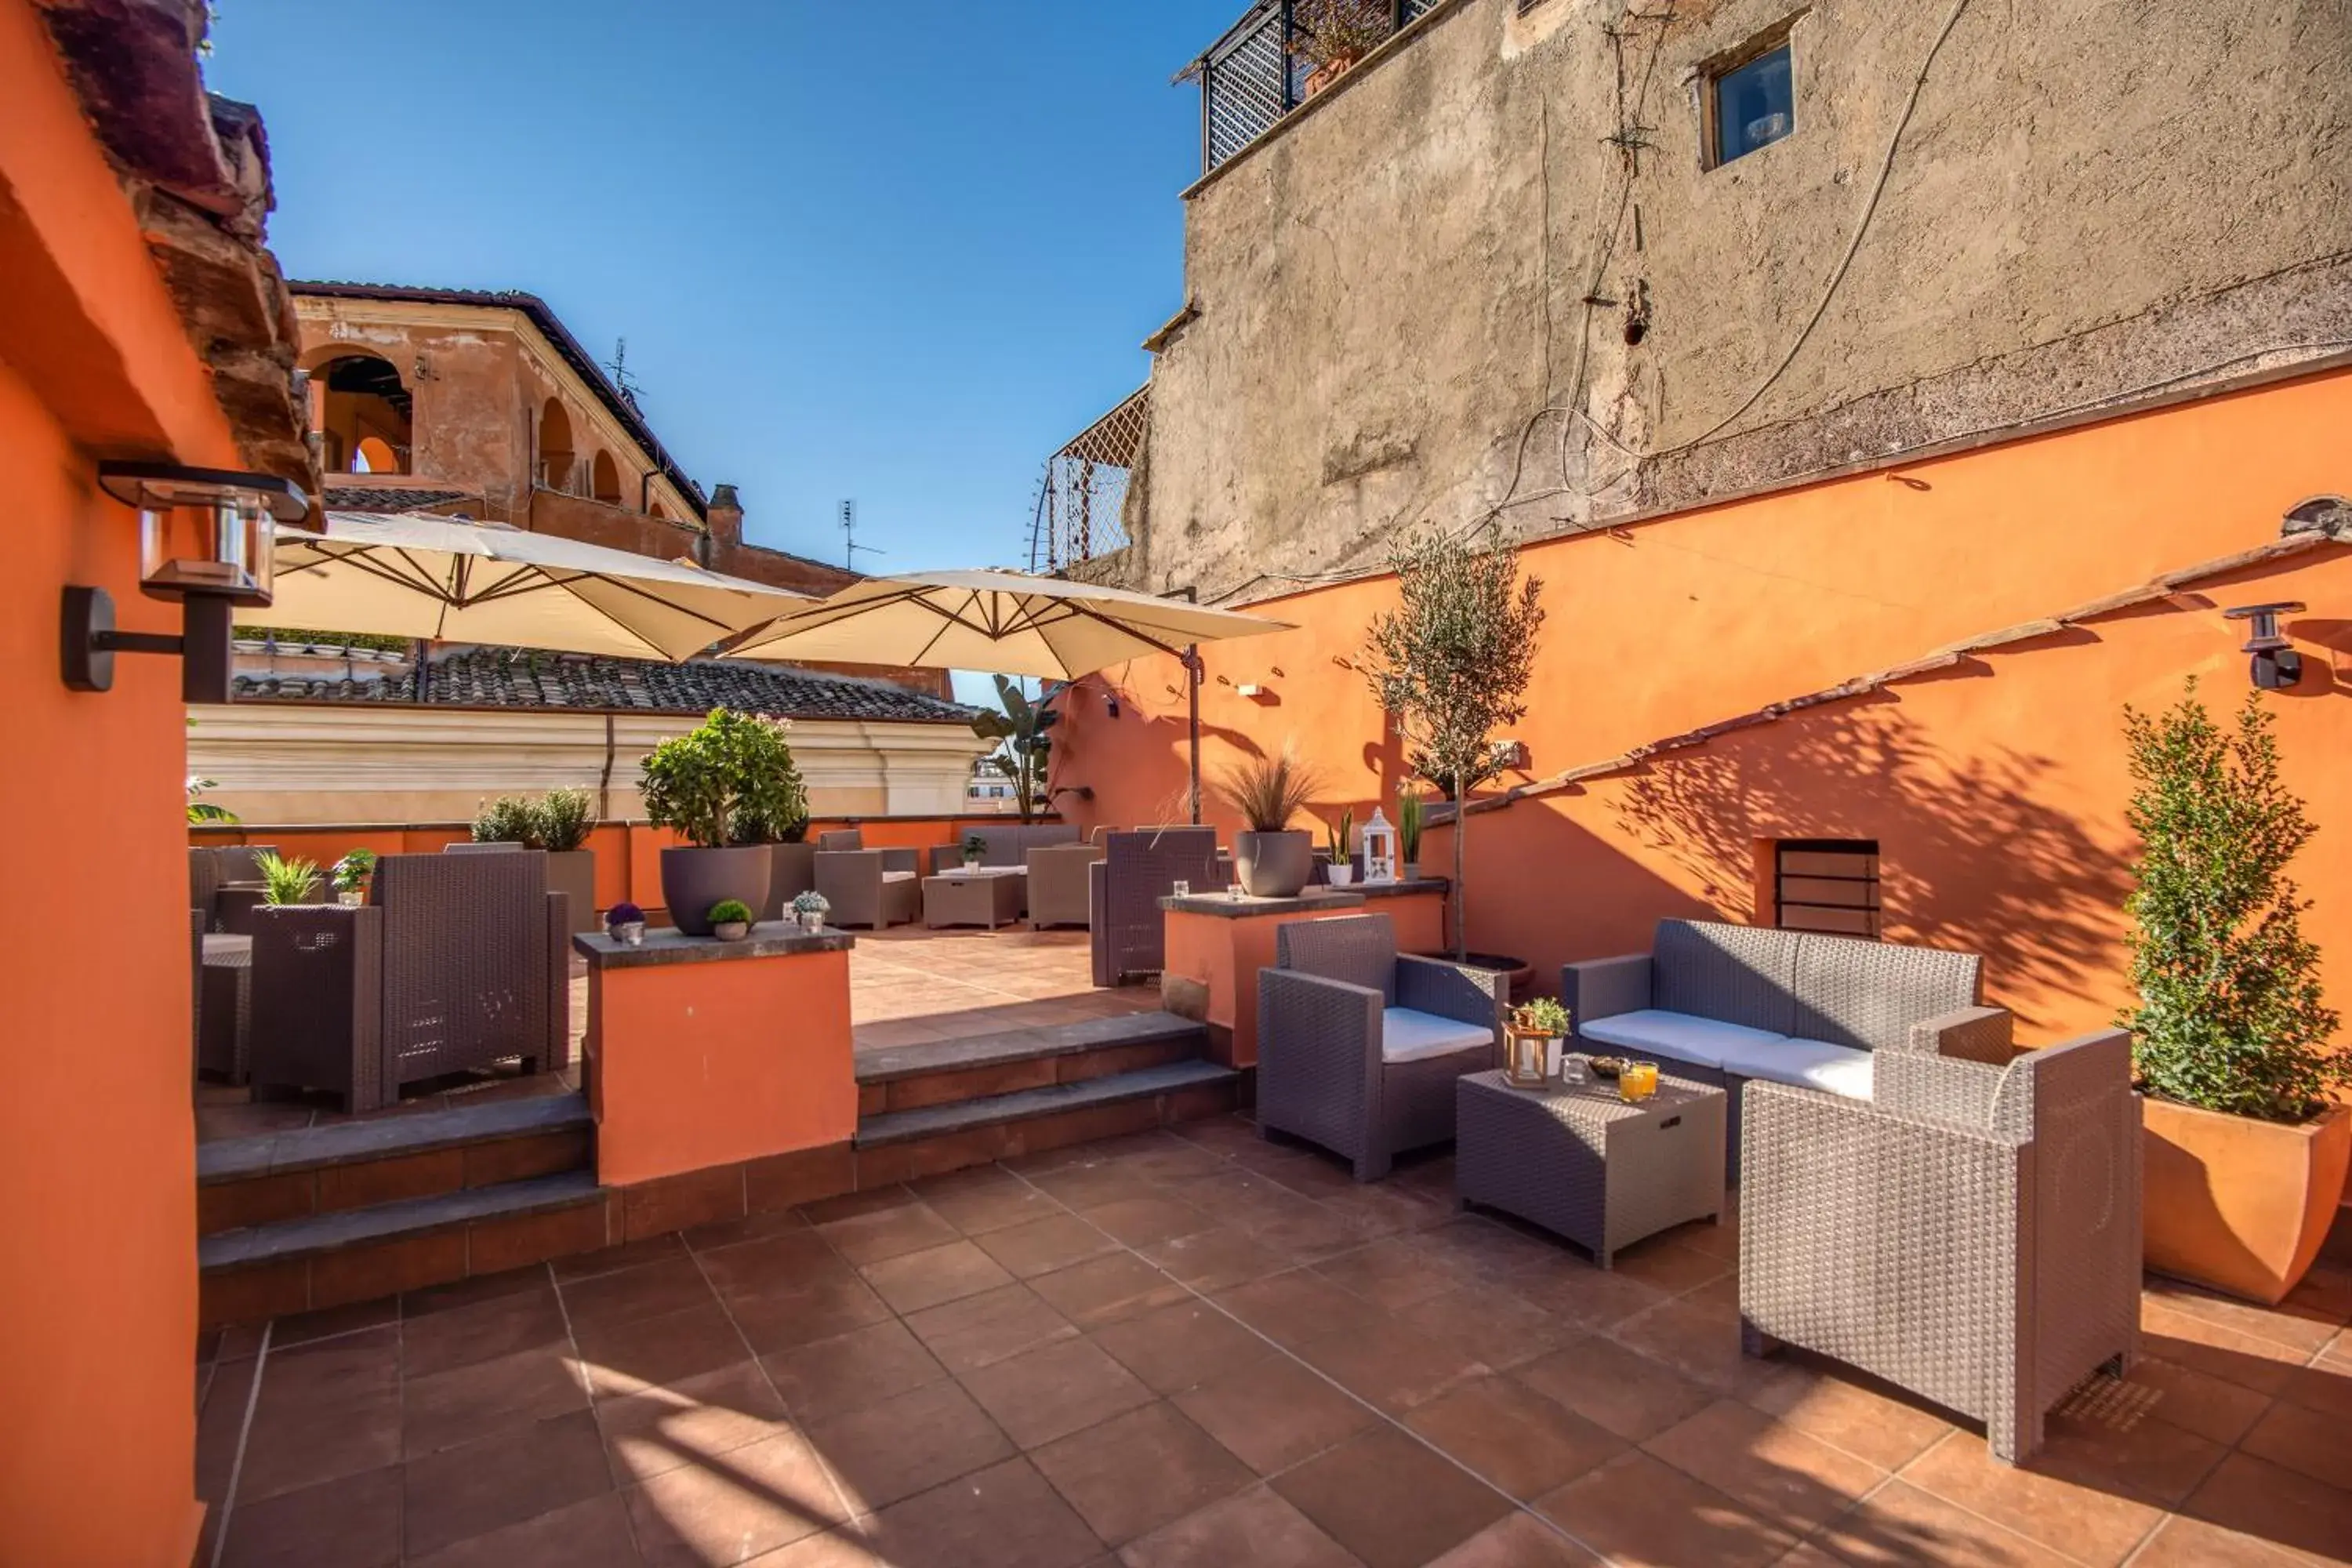 Property building in Piazza di Spagna Comfort Rooms